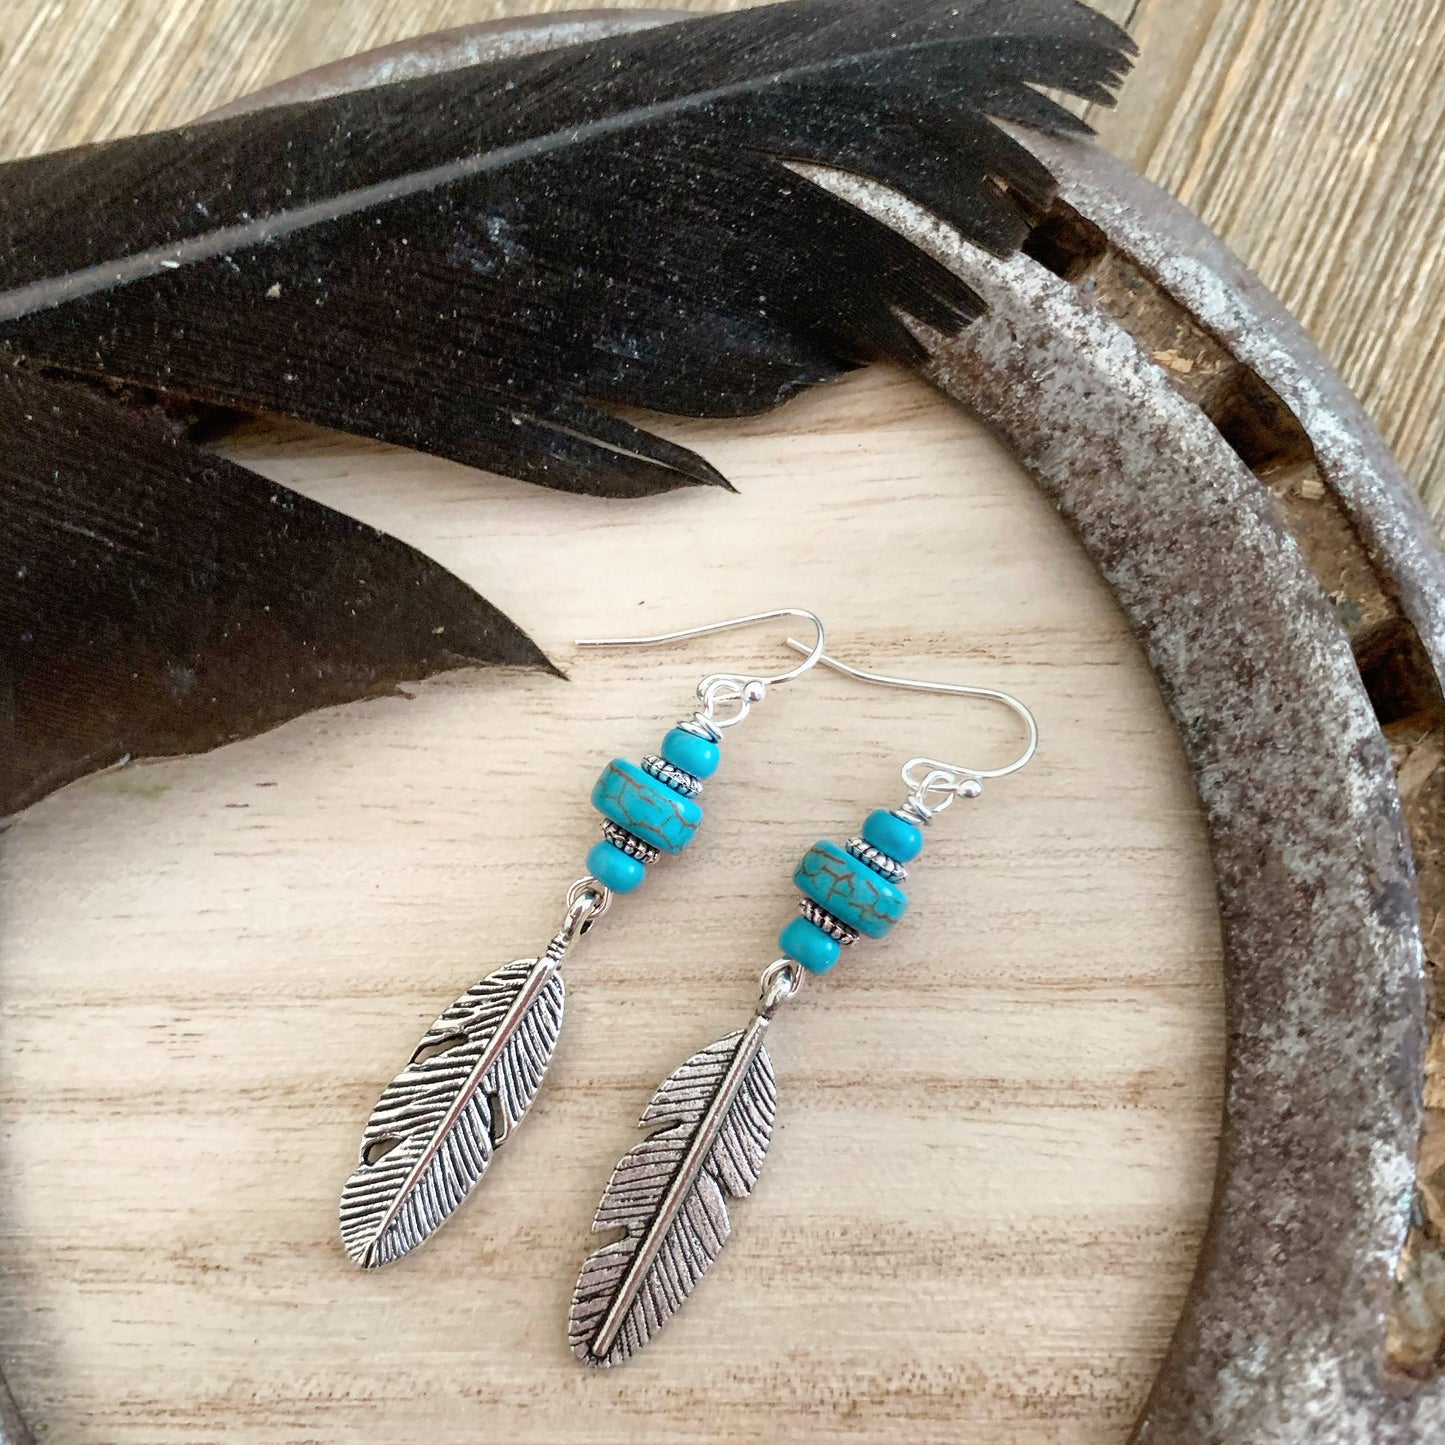 Feather charms in silver, blue turquoise stone and sterling silver earrings. - Andria Bieber Designs 